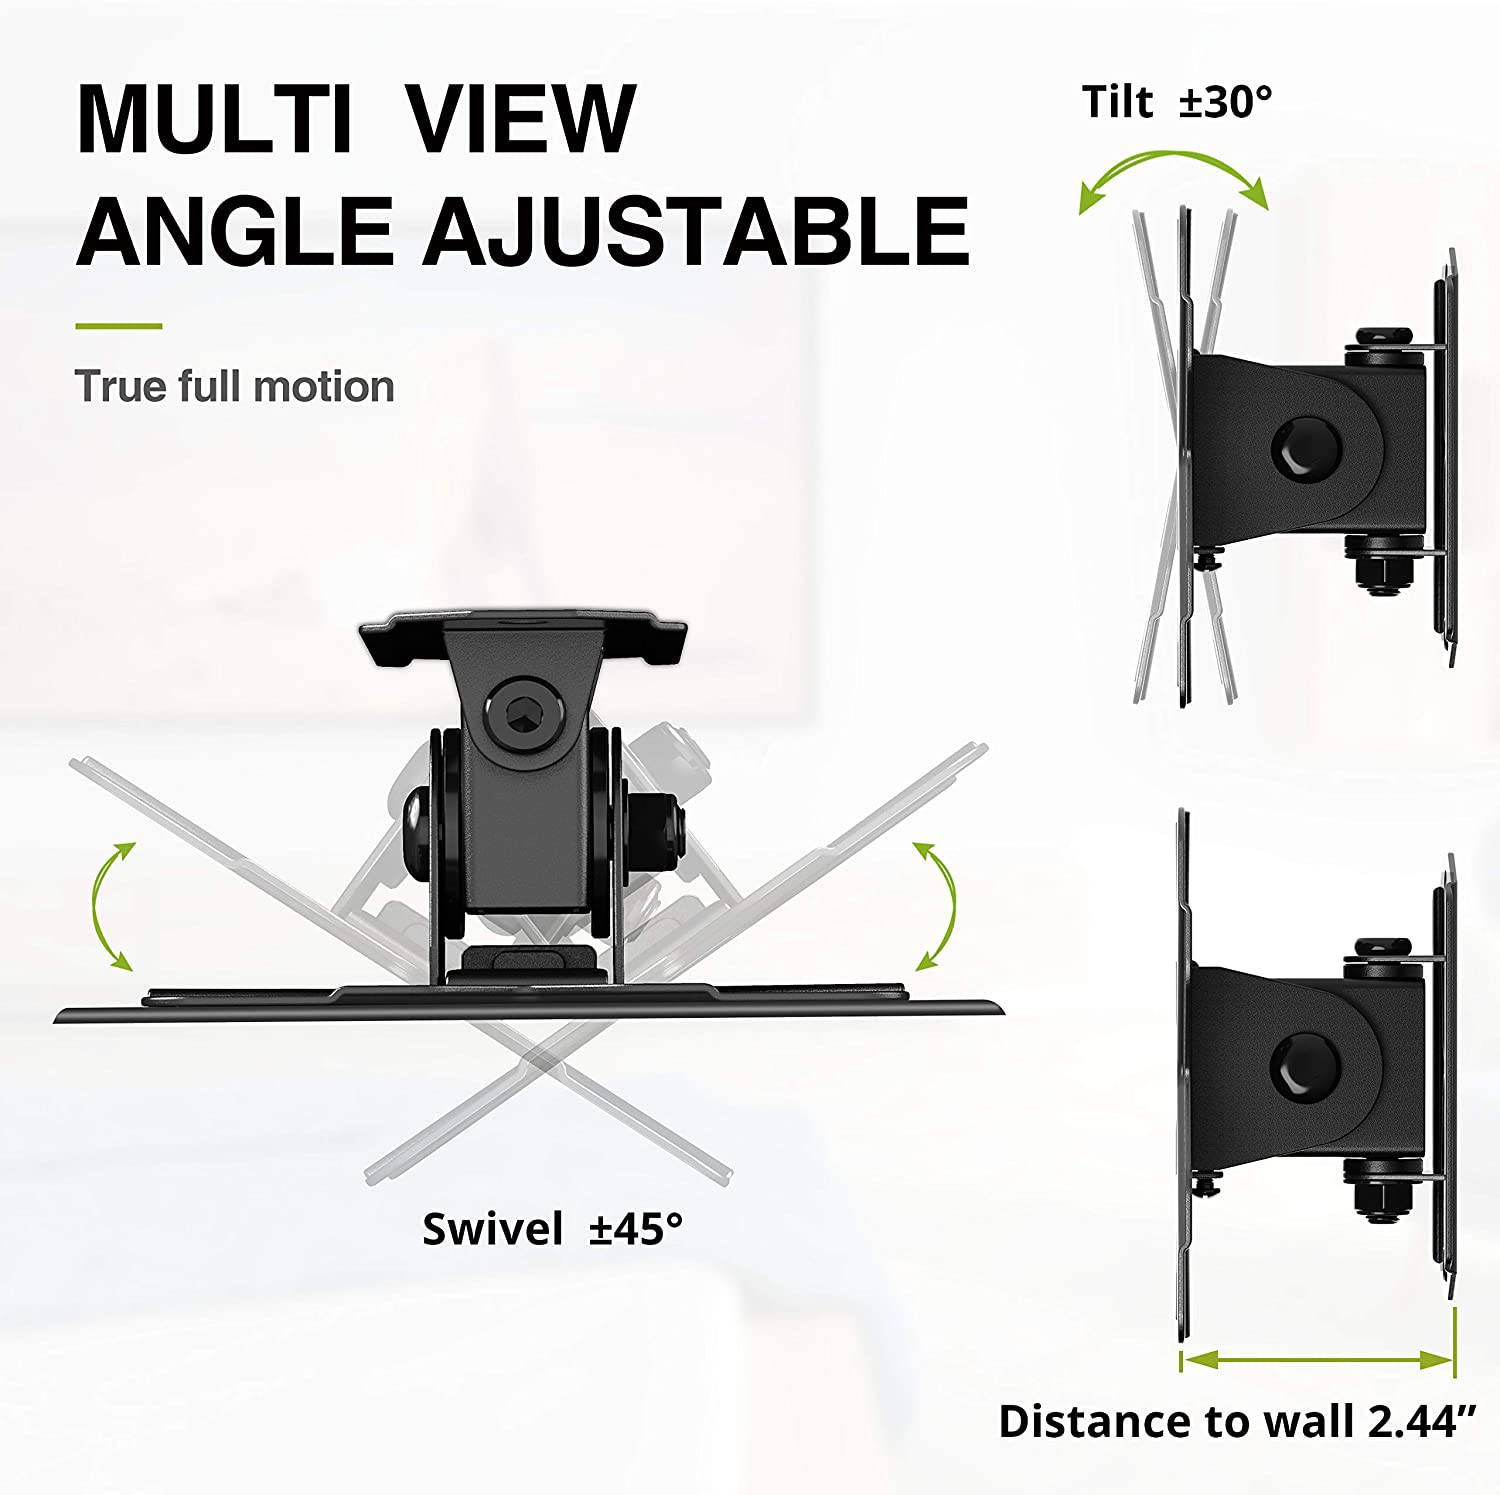 USX Mount TV Wall Mount with Adjustable Tilt Swivel for 10inch to 26inch TV & Monitor, Weight Capacity 22 lbs, Size: 4.92 x 4.53 x 2.56, Black